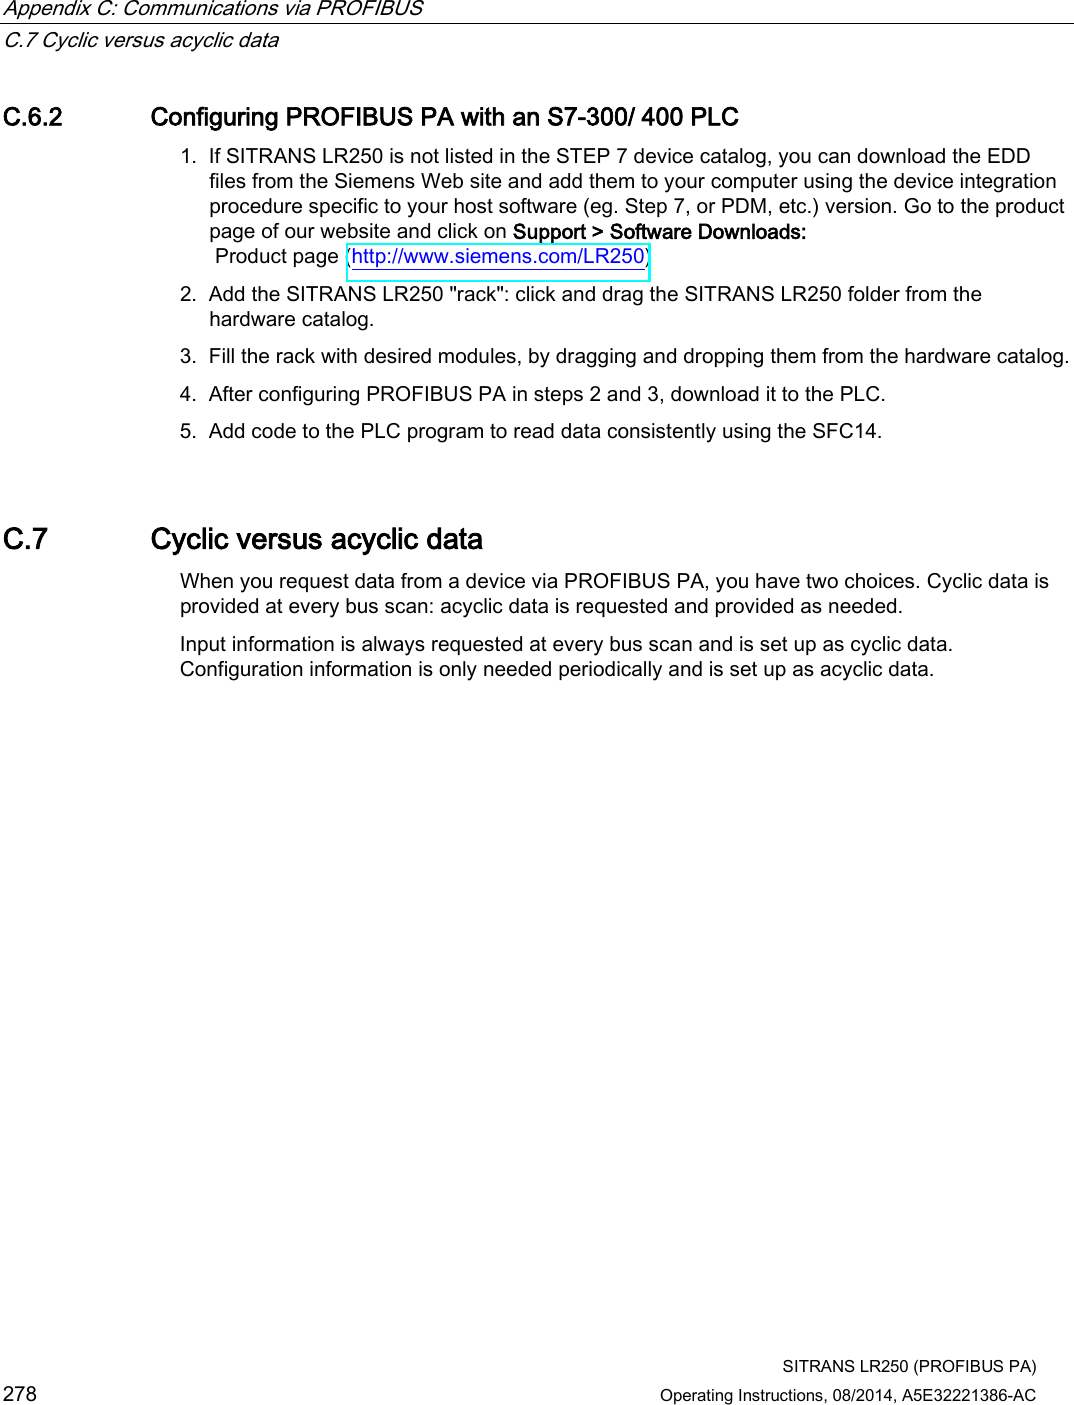 Appendix C: Communications via PROFIBUS   C.7 Cyclic versus acyclic data  SITRANS LR250 (PROFIBUS PA) 278 Operating Instructions, 08/2014, A5E32221386-AC C.6.2 Configuring PROFIBUS PA with an S7-300/ 400 PLC 1. If SITRANS LR250 is not listed in the STEP 7 device catalog, you can download the EDD files from the Siemens Web site and add them to your computer using the device integration procedure specific to your host software (eg. Step 7, or PDM, etc.) version. Go to the product page of our website and click on Support &gt; Software Downloads:  Product page (http://www.siemens.com/LR250) 2. Add the SITRANS LR250 &quot;rack&quot;: click and drag the SITRANS LR250 folder from the hardware catalog. 3. Fill the rack with desired modules, by dragging and dropping them from the hardware catalog. 4. After configuring PROFIBUS PA in steps 2 and 3, download it to the PLC. 5. Add code to the PLC program to read data consistently using the SFC14. C.7 Cyclic versus acyclic data When you request data from a device via PROFIBUS PA, you have two choices. Cyclic data is provided at every bus scan: acyclic data is requested and provided as needed.  Input information is always requested at every bus scan and is set up as cyclic data. Configuration information is only needed periodically and is set up as acyclic data. 